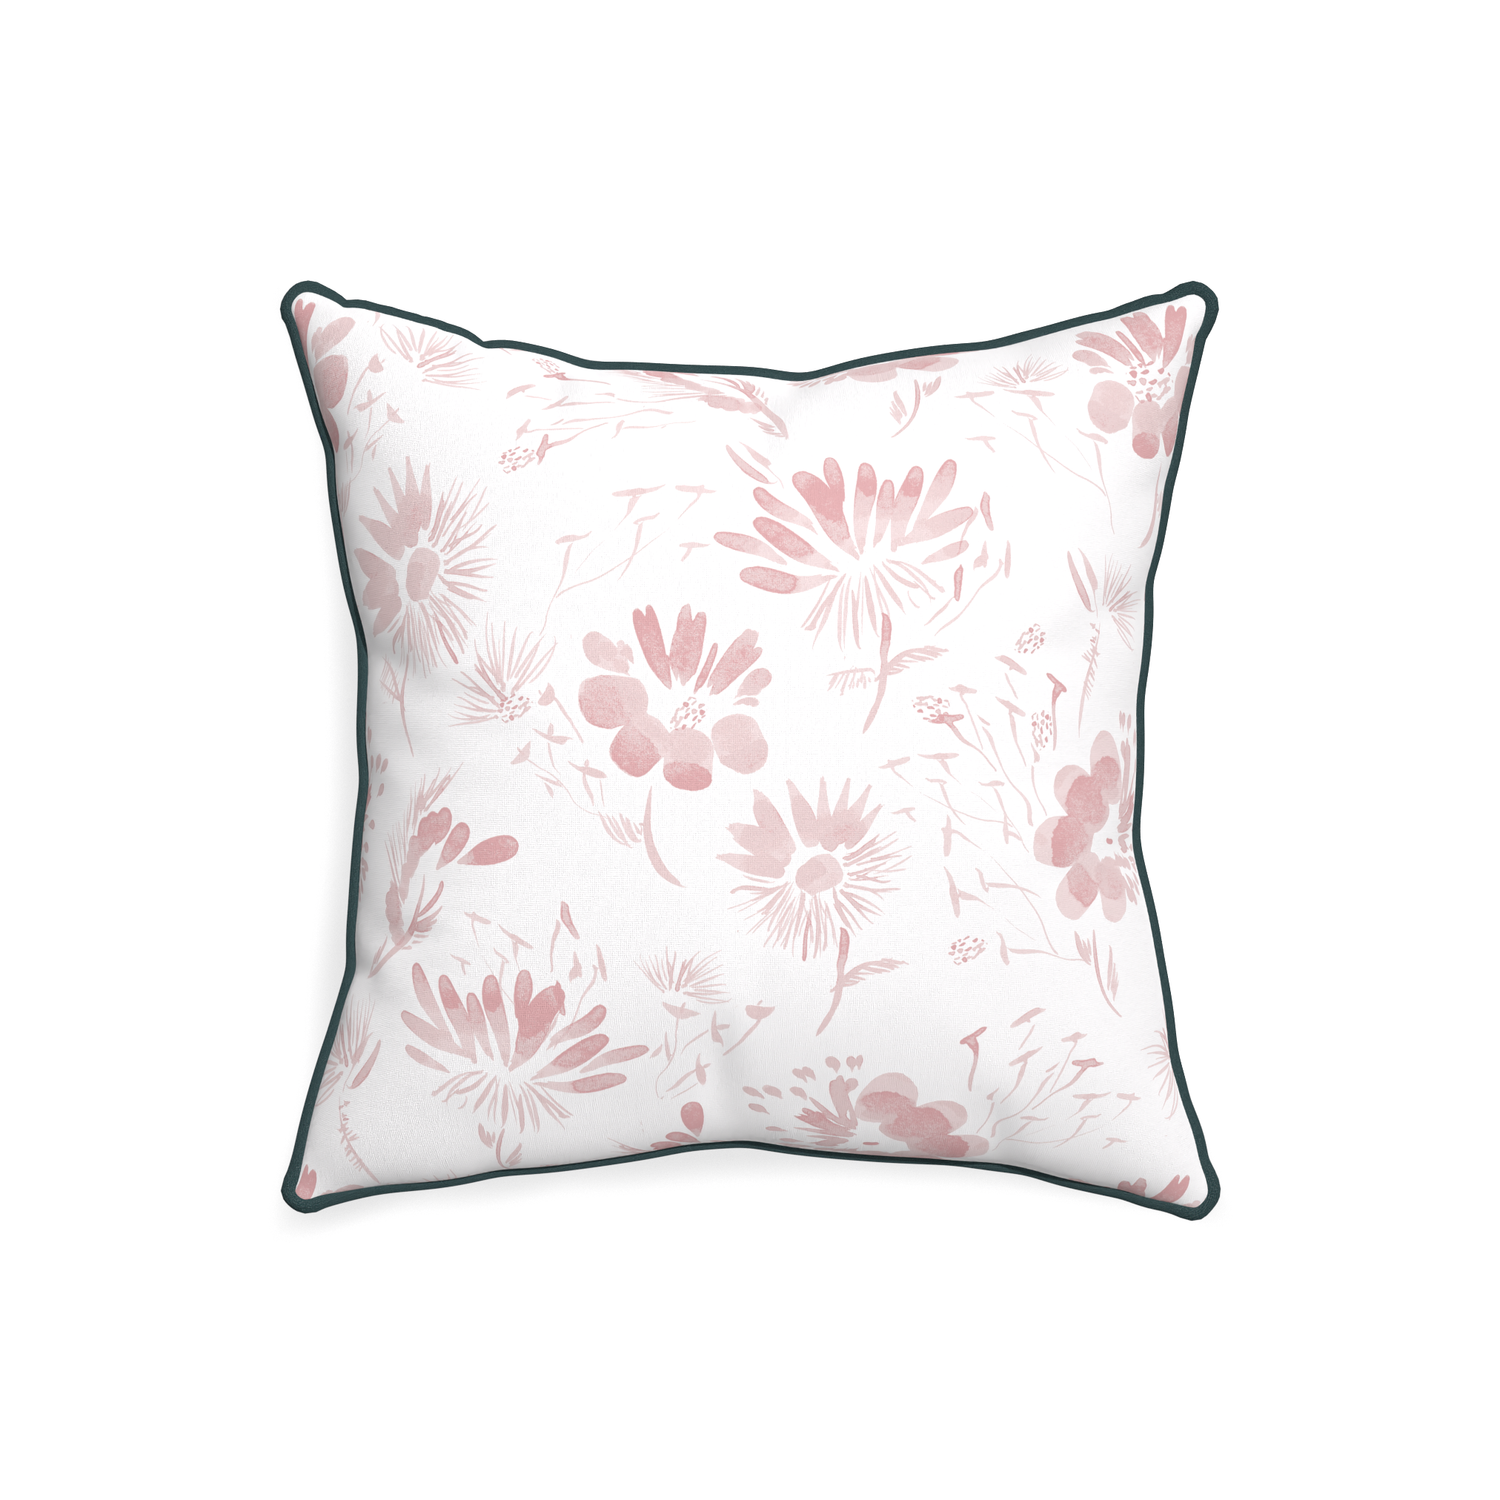 20-square blake custom pink floralpillow with p piping on white background